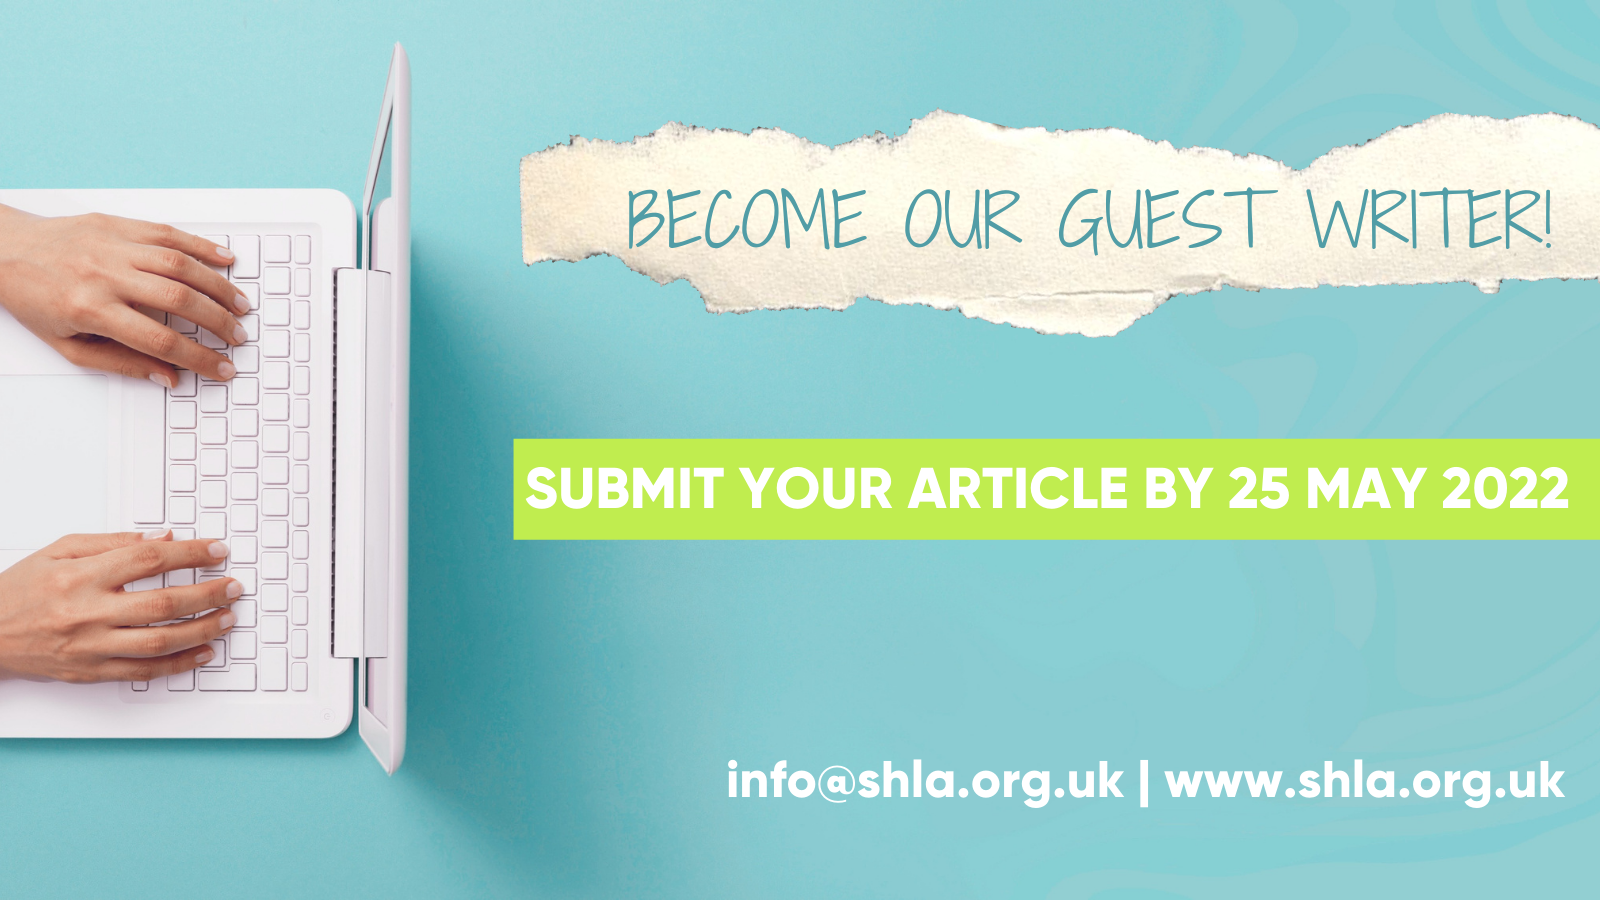 WILL YOU BE A GUEST WRITER FOR THE NEXT SHLA NEWSLETTER?